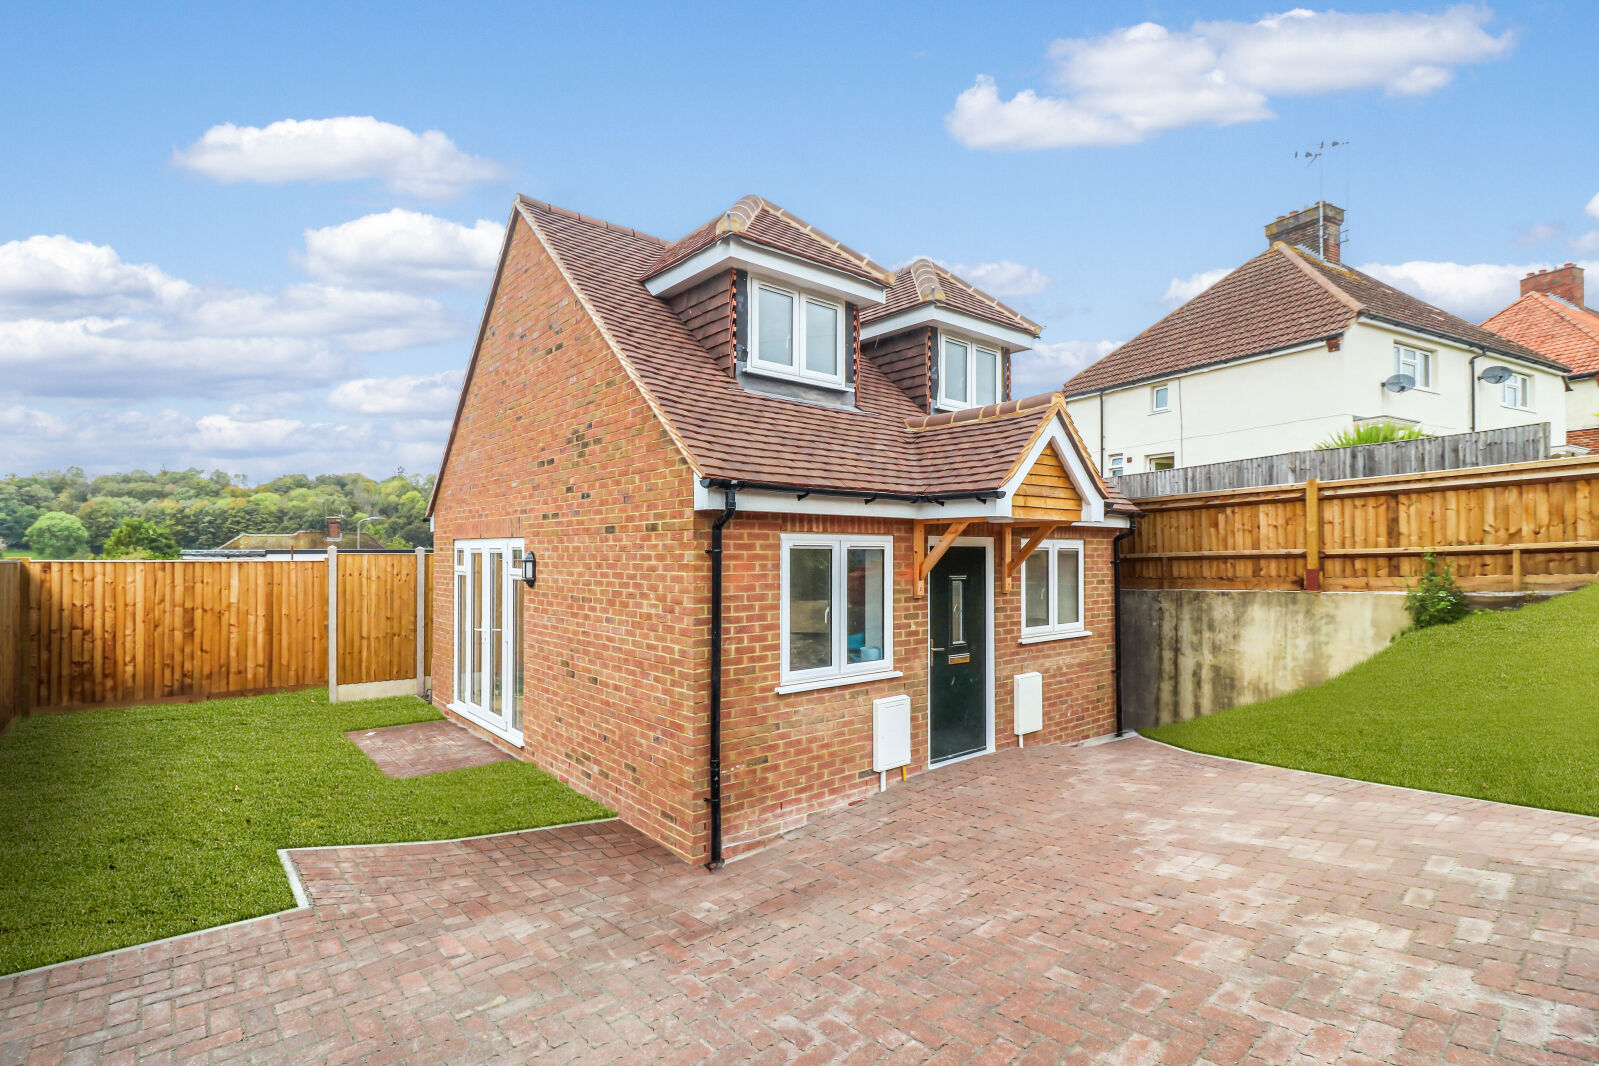 1 bedroom detached house for sale Rowan Avenue, High Wycombe, HP13, main image